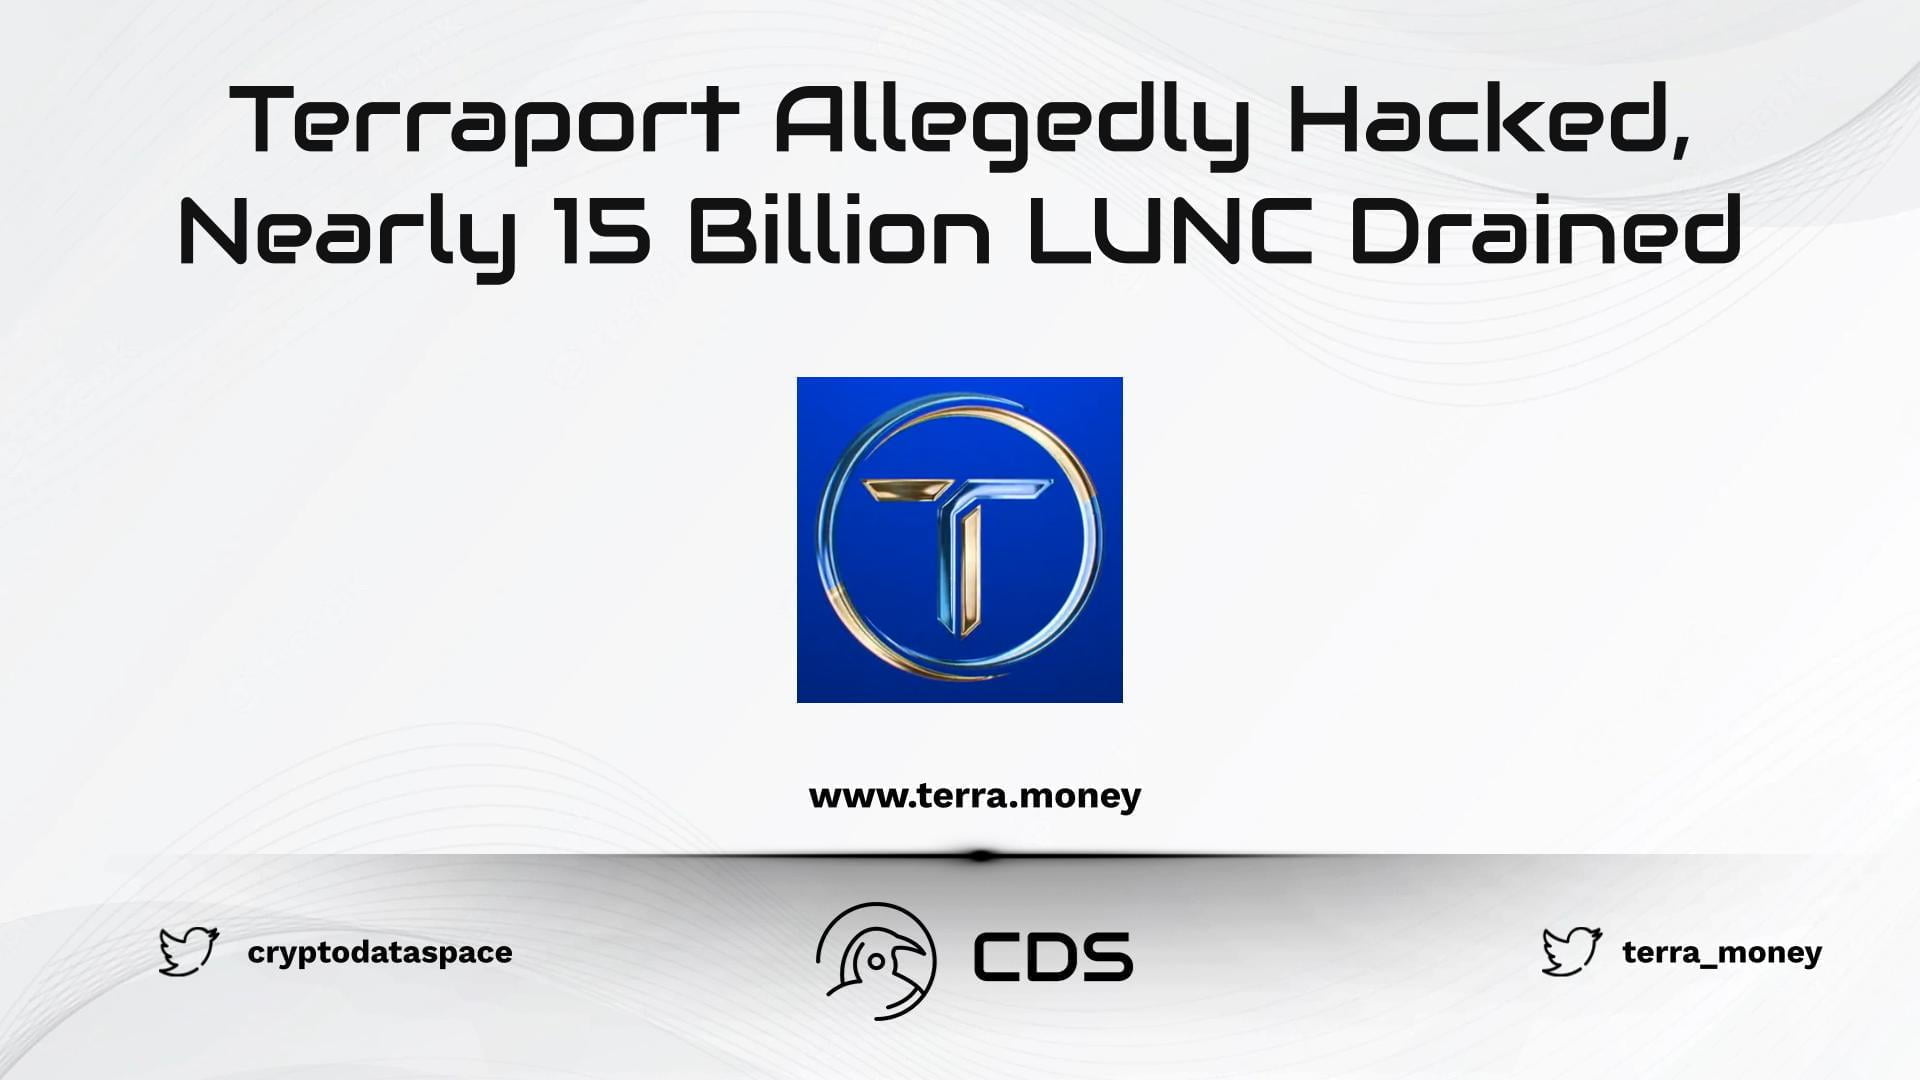 Terraport Allegedly Hacked, Nearly 15 Billion LUNC Drained